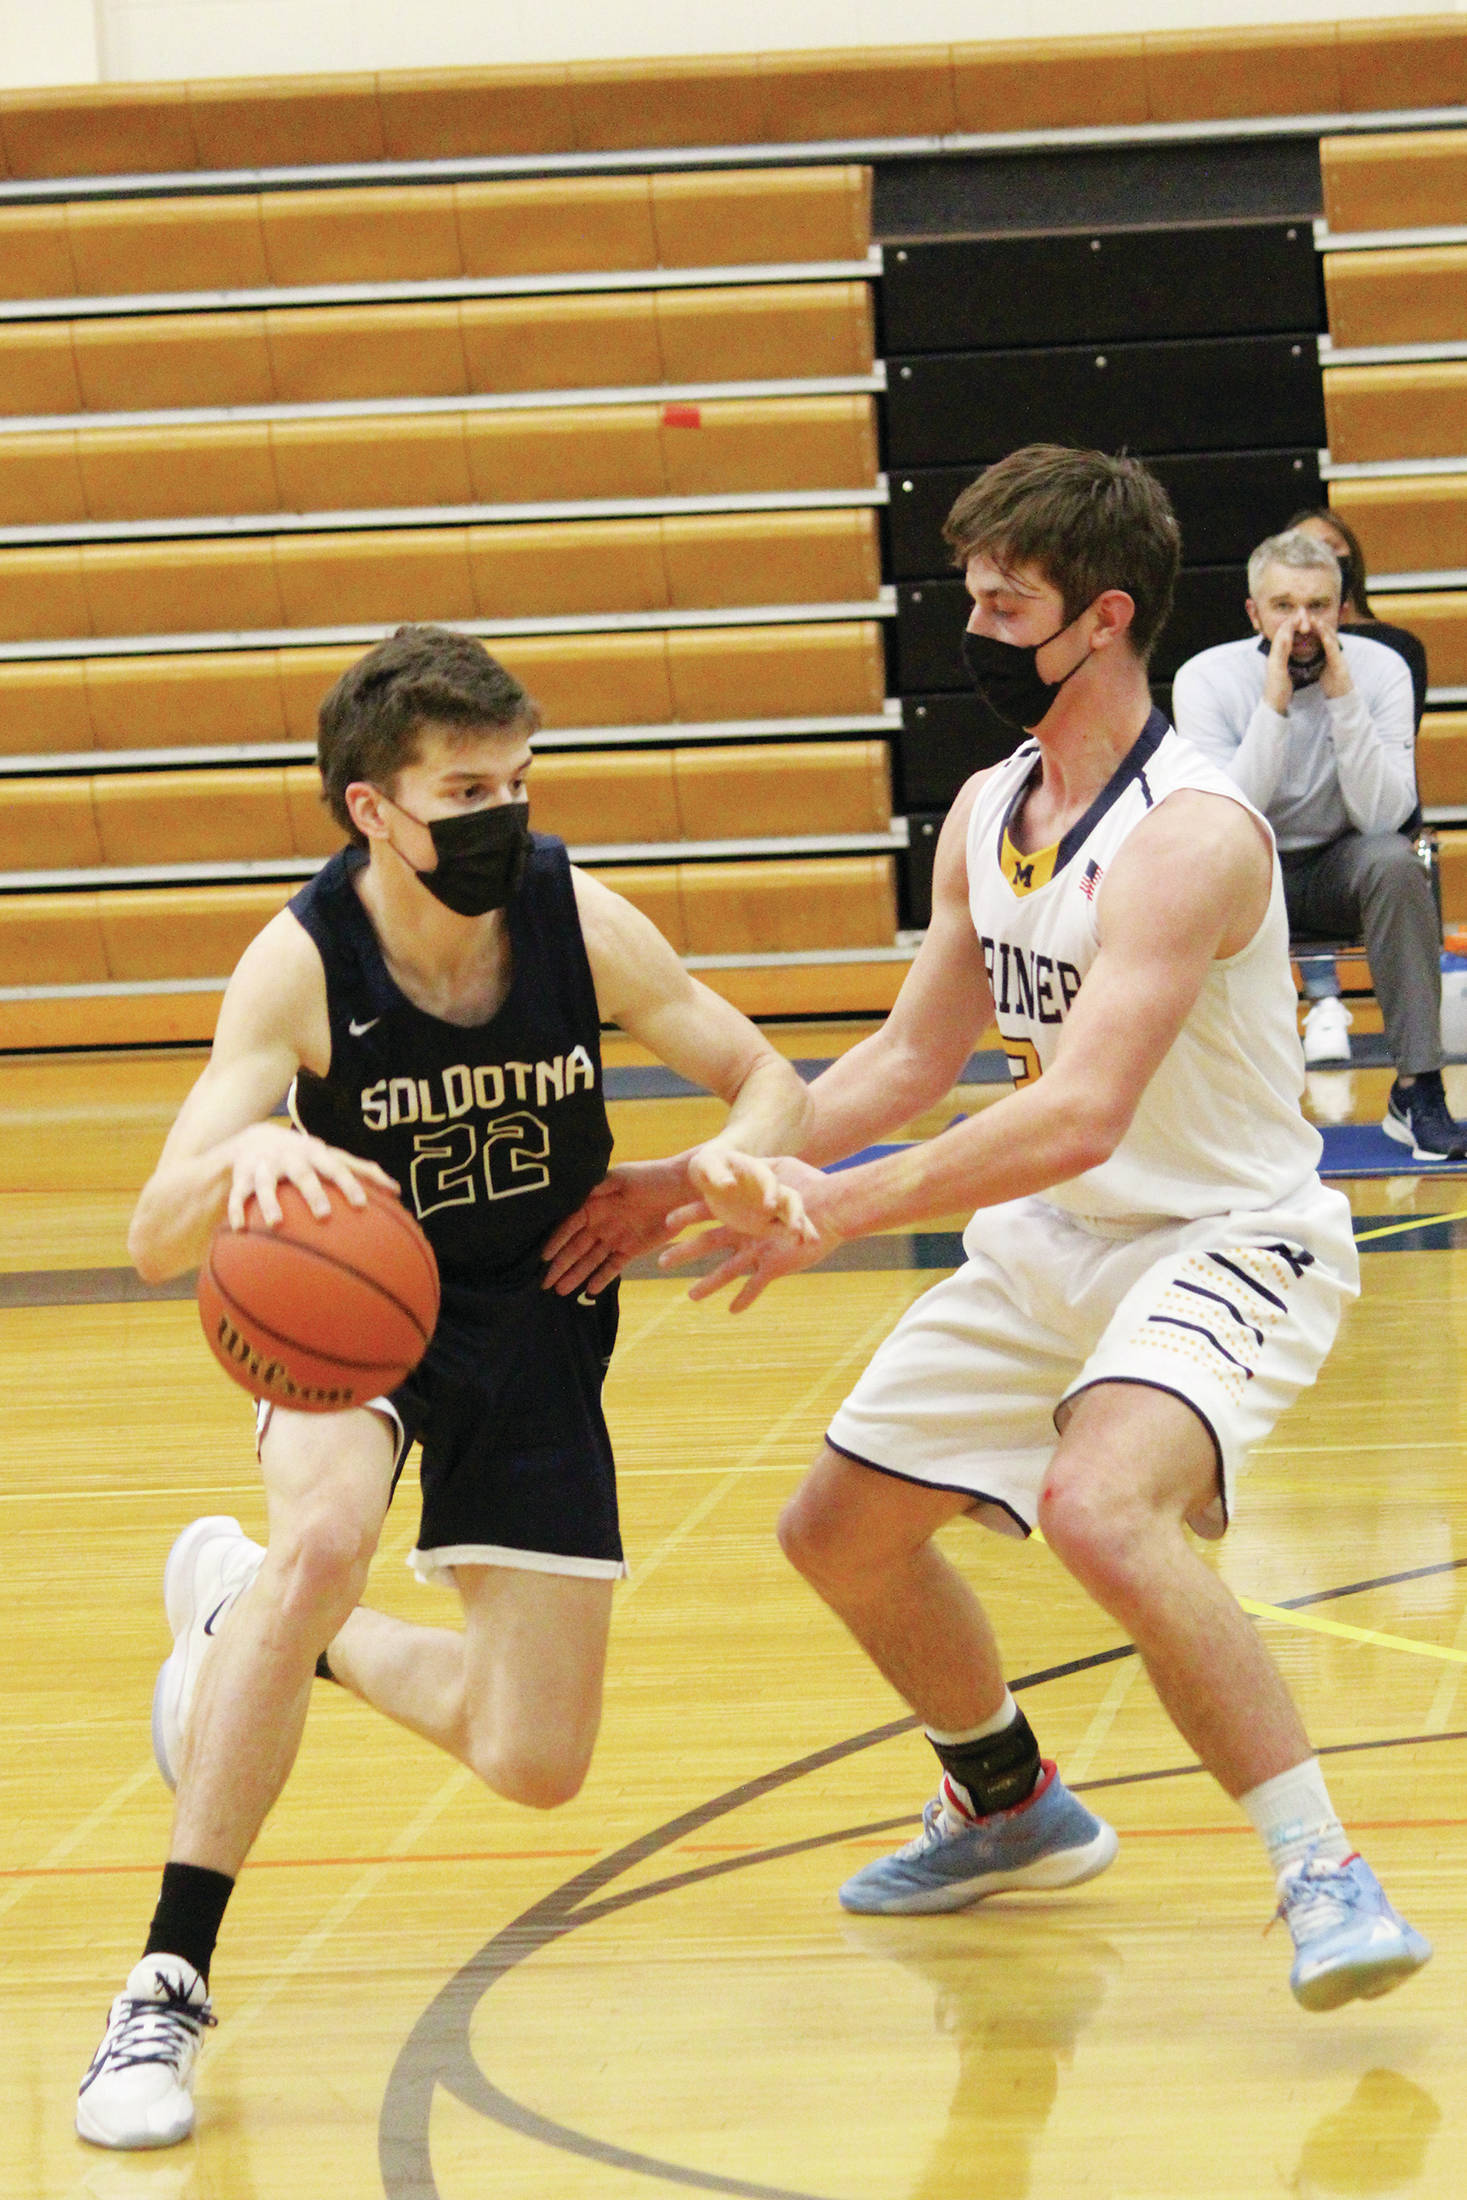 Soldotna’s Ethan Sewell looks for a way around Homer’s Clayton Beachy during a Tuesday, March 2, 2021 basketball game in the Alice Witte Gymnasium in Homer, Alaska. (Photo by Megan Pacer/Homer News)